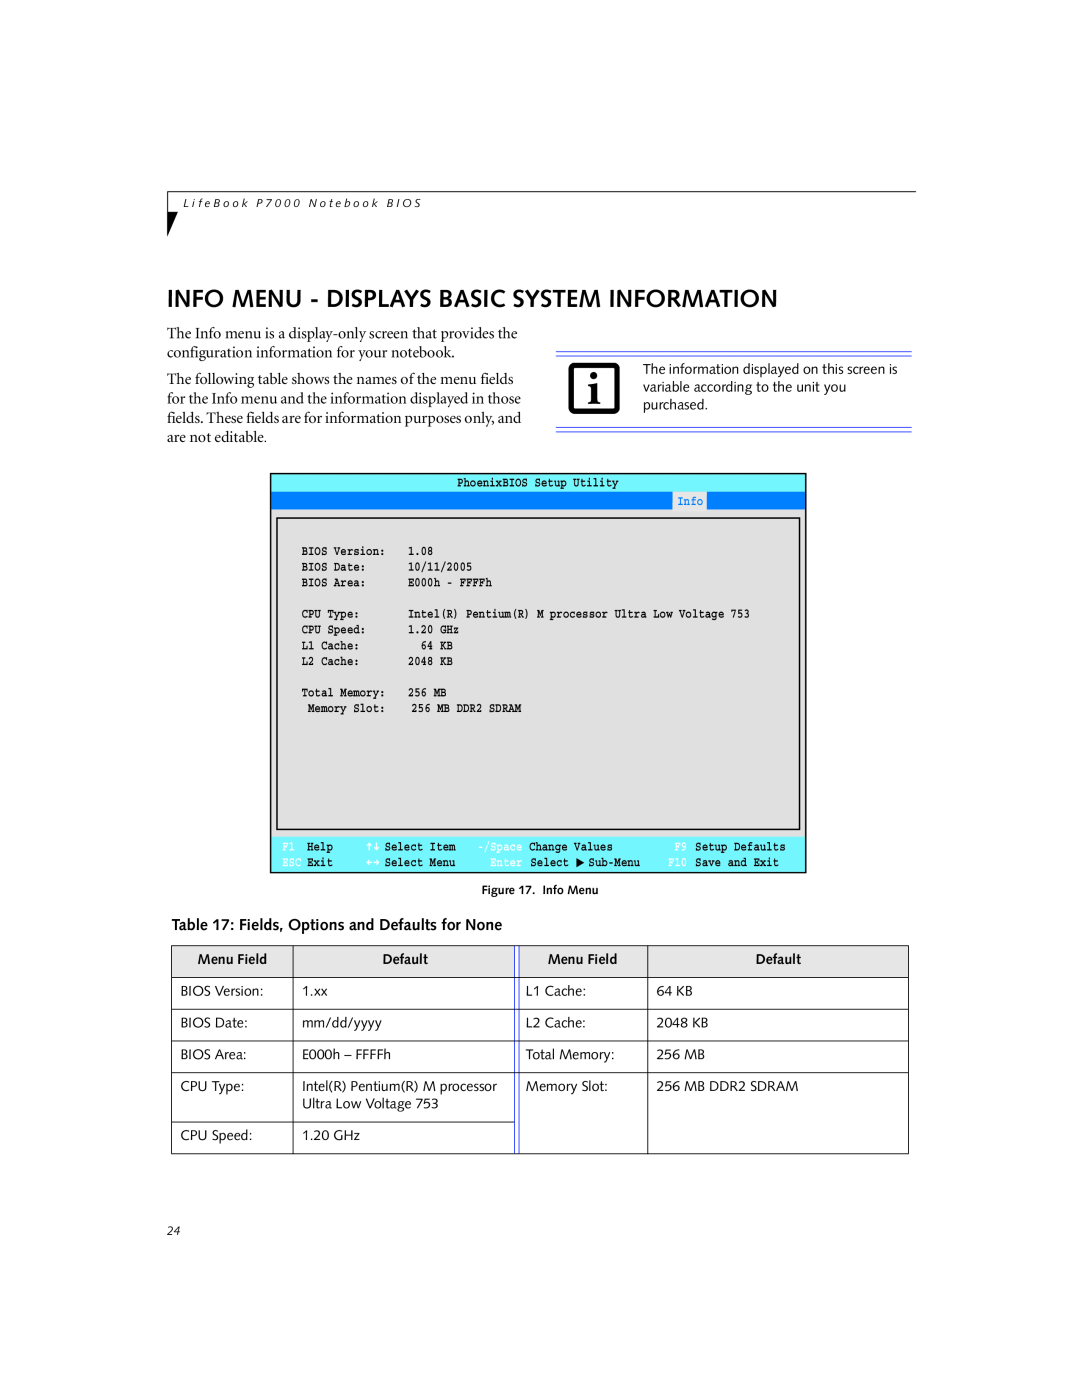 Fujitsu P1510D manual Info Menu - Displays Basic System Information, Fields, Options and Defaults for None 